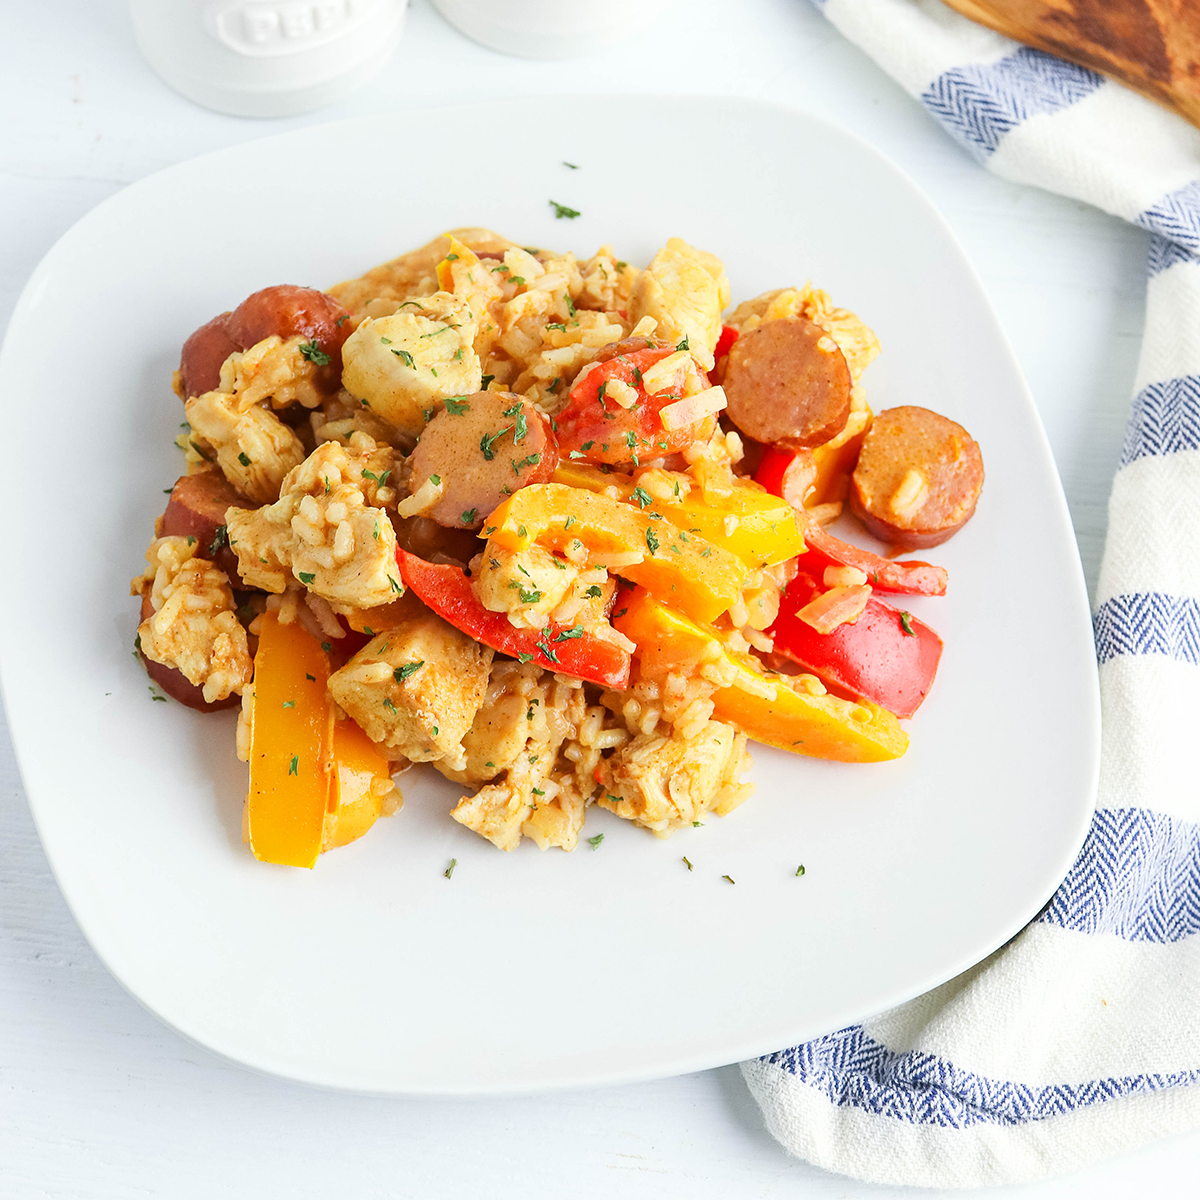 Spicy Cajun Sausage and Chicken Skillet Recipe - The Forked Spoon